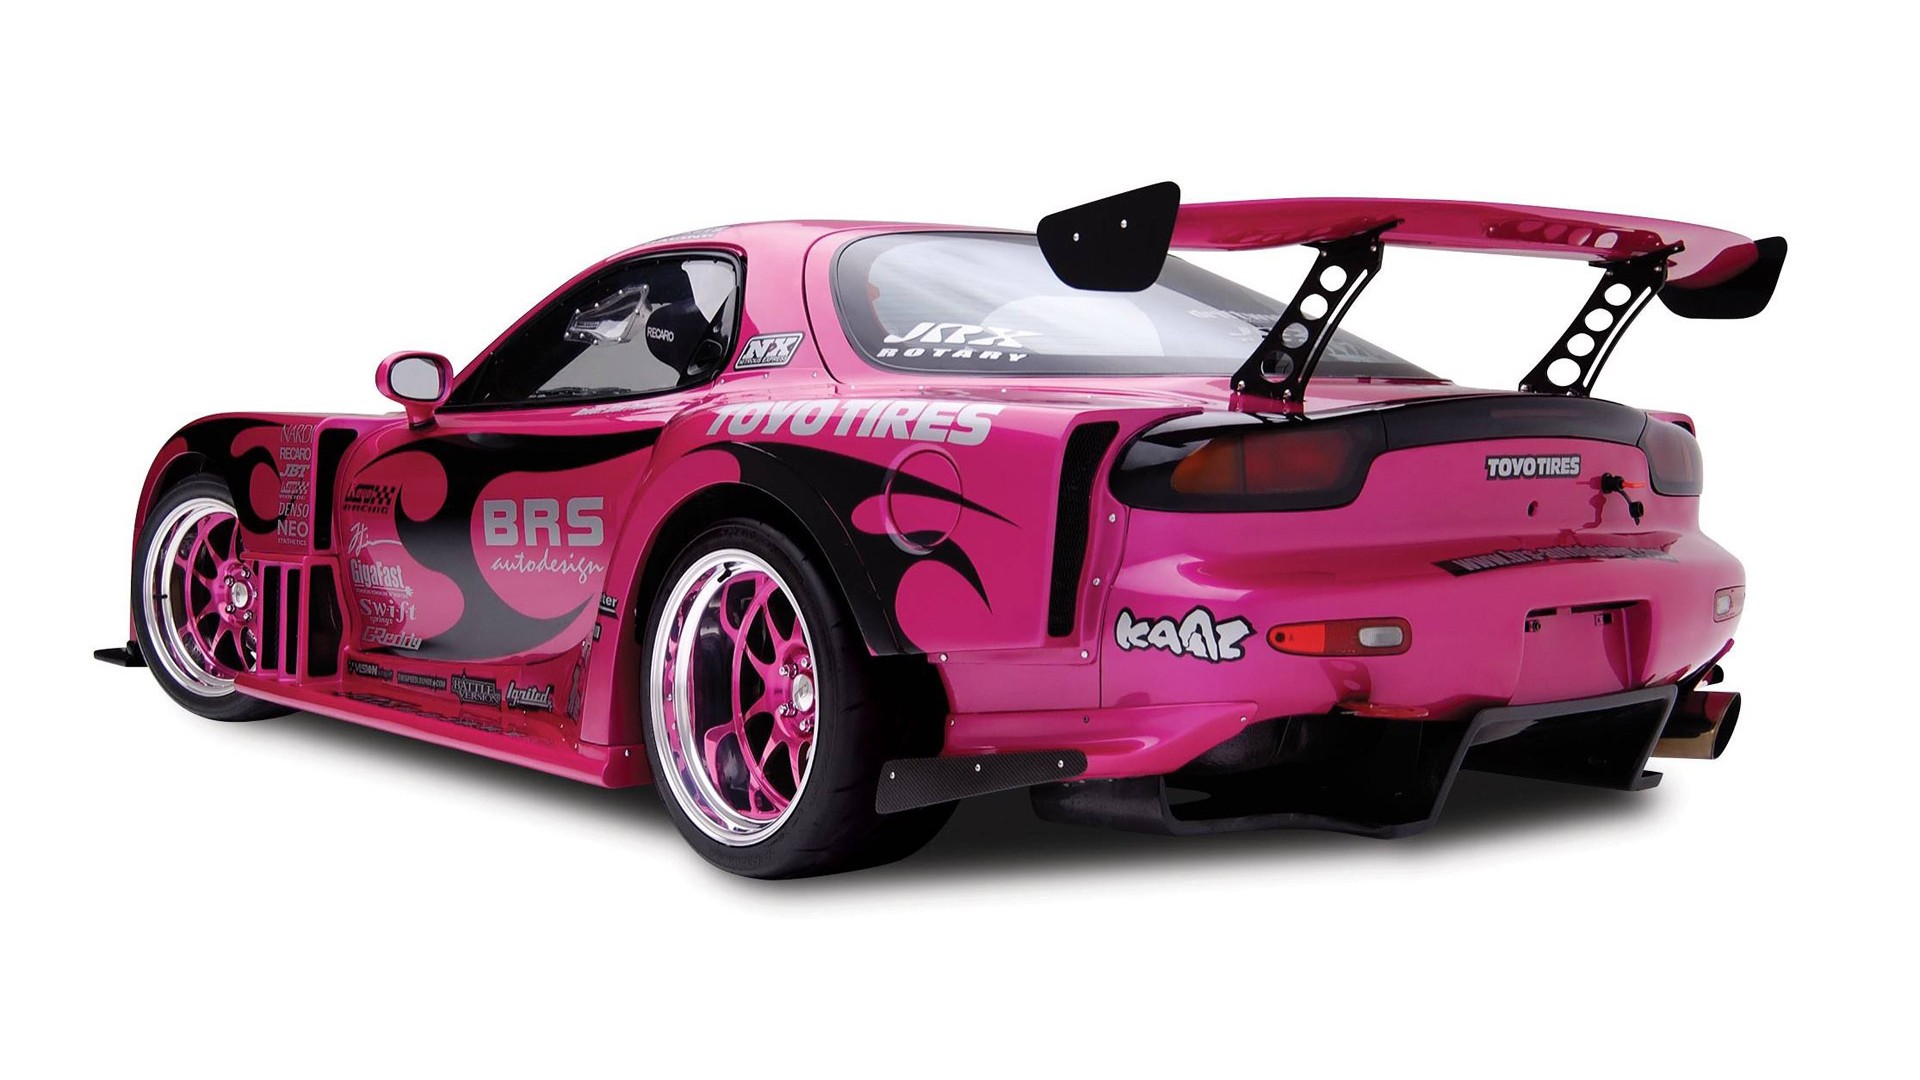 The Pink Toyo Rx7 Wallpaper iPhone